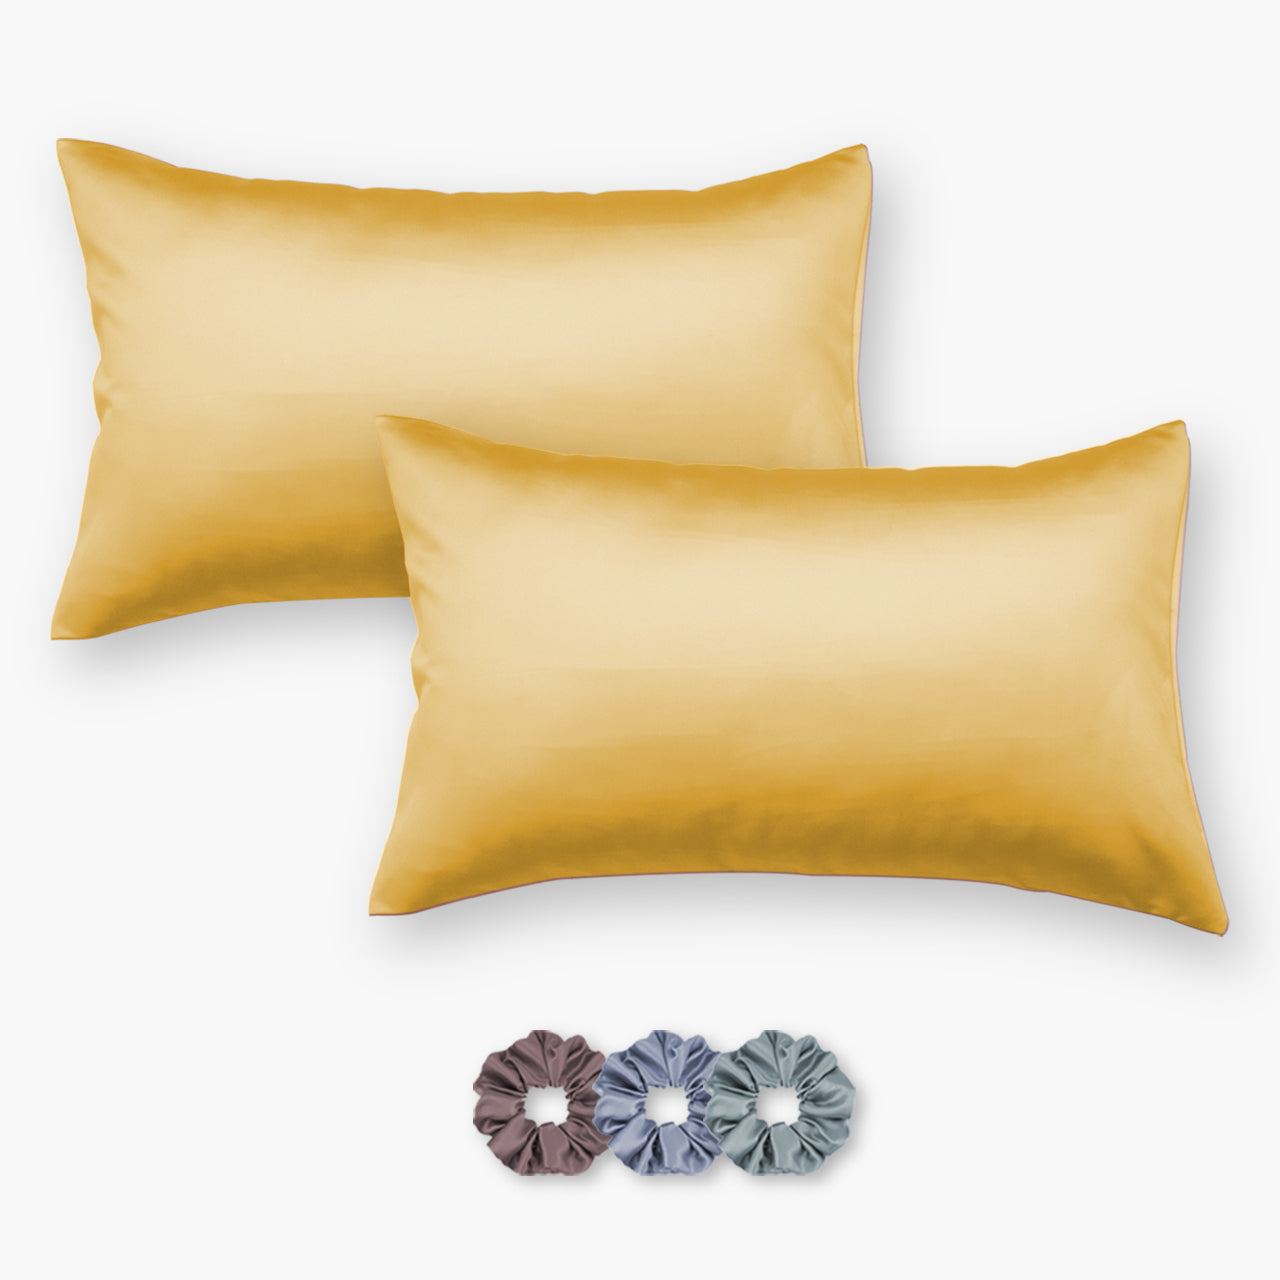 Yellow Satin Pillow Covers - Set of 2 (With 3 Free Scrunchies)